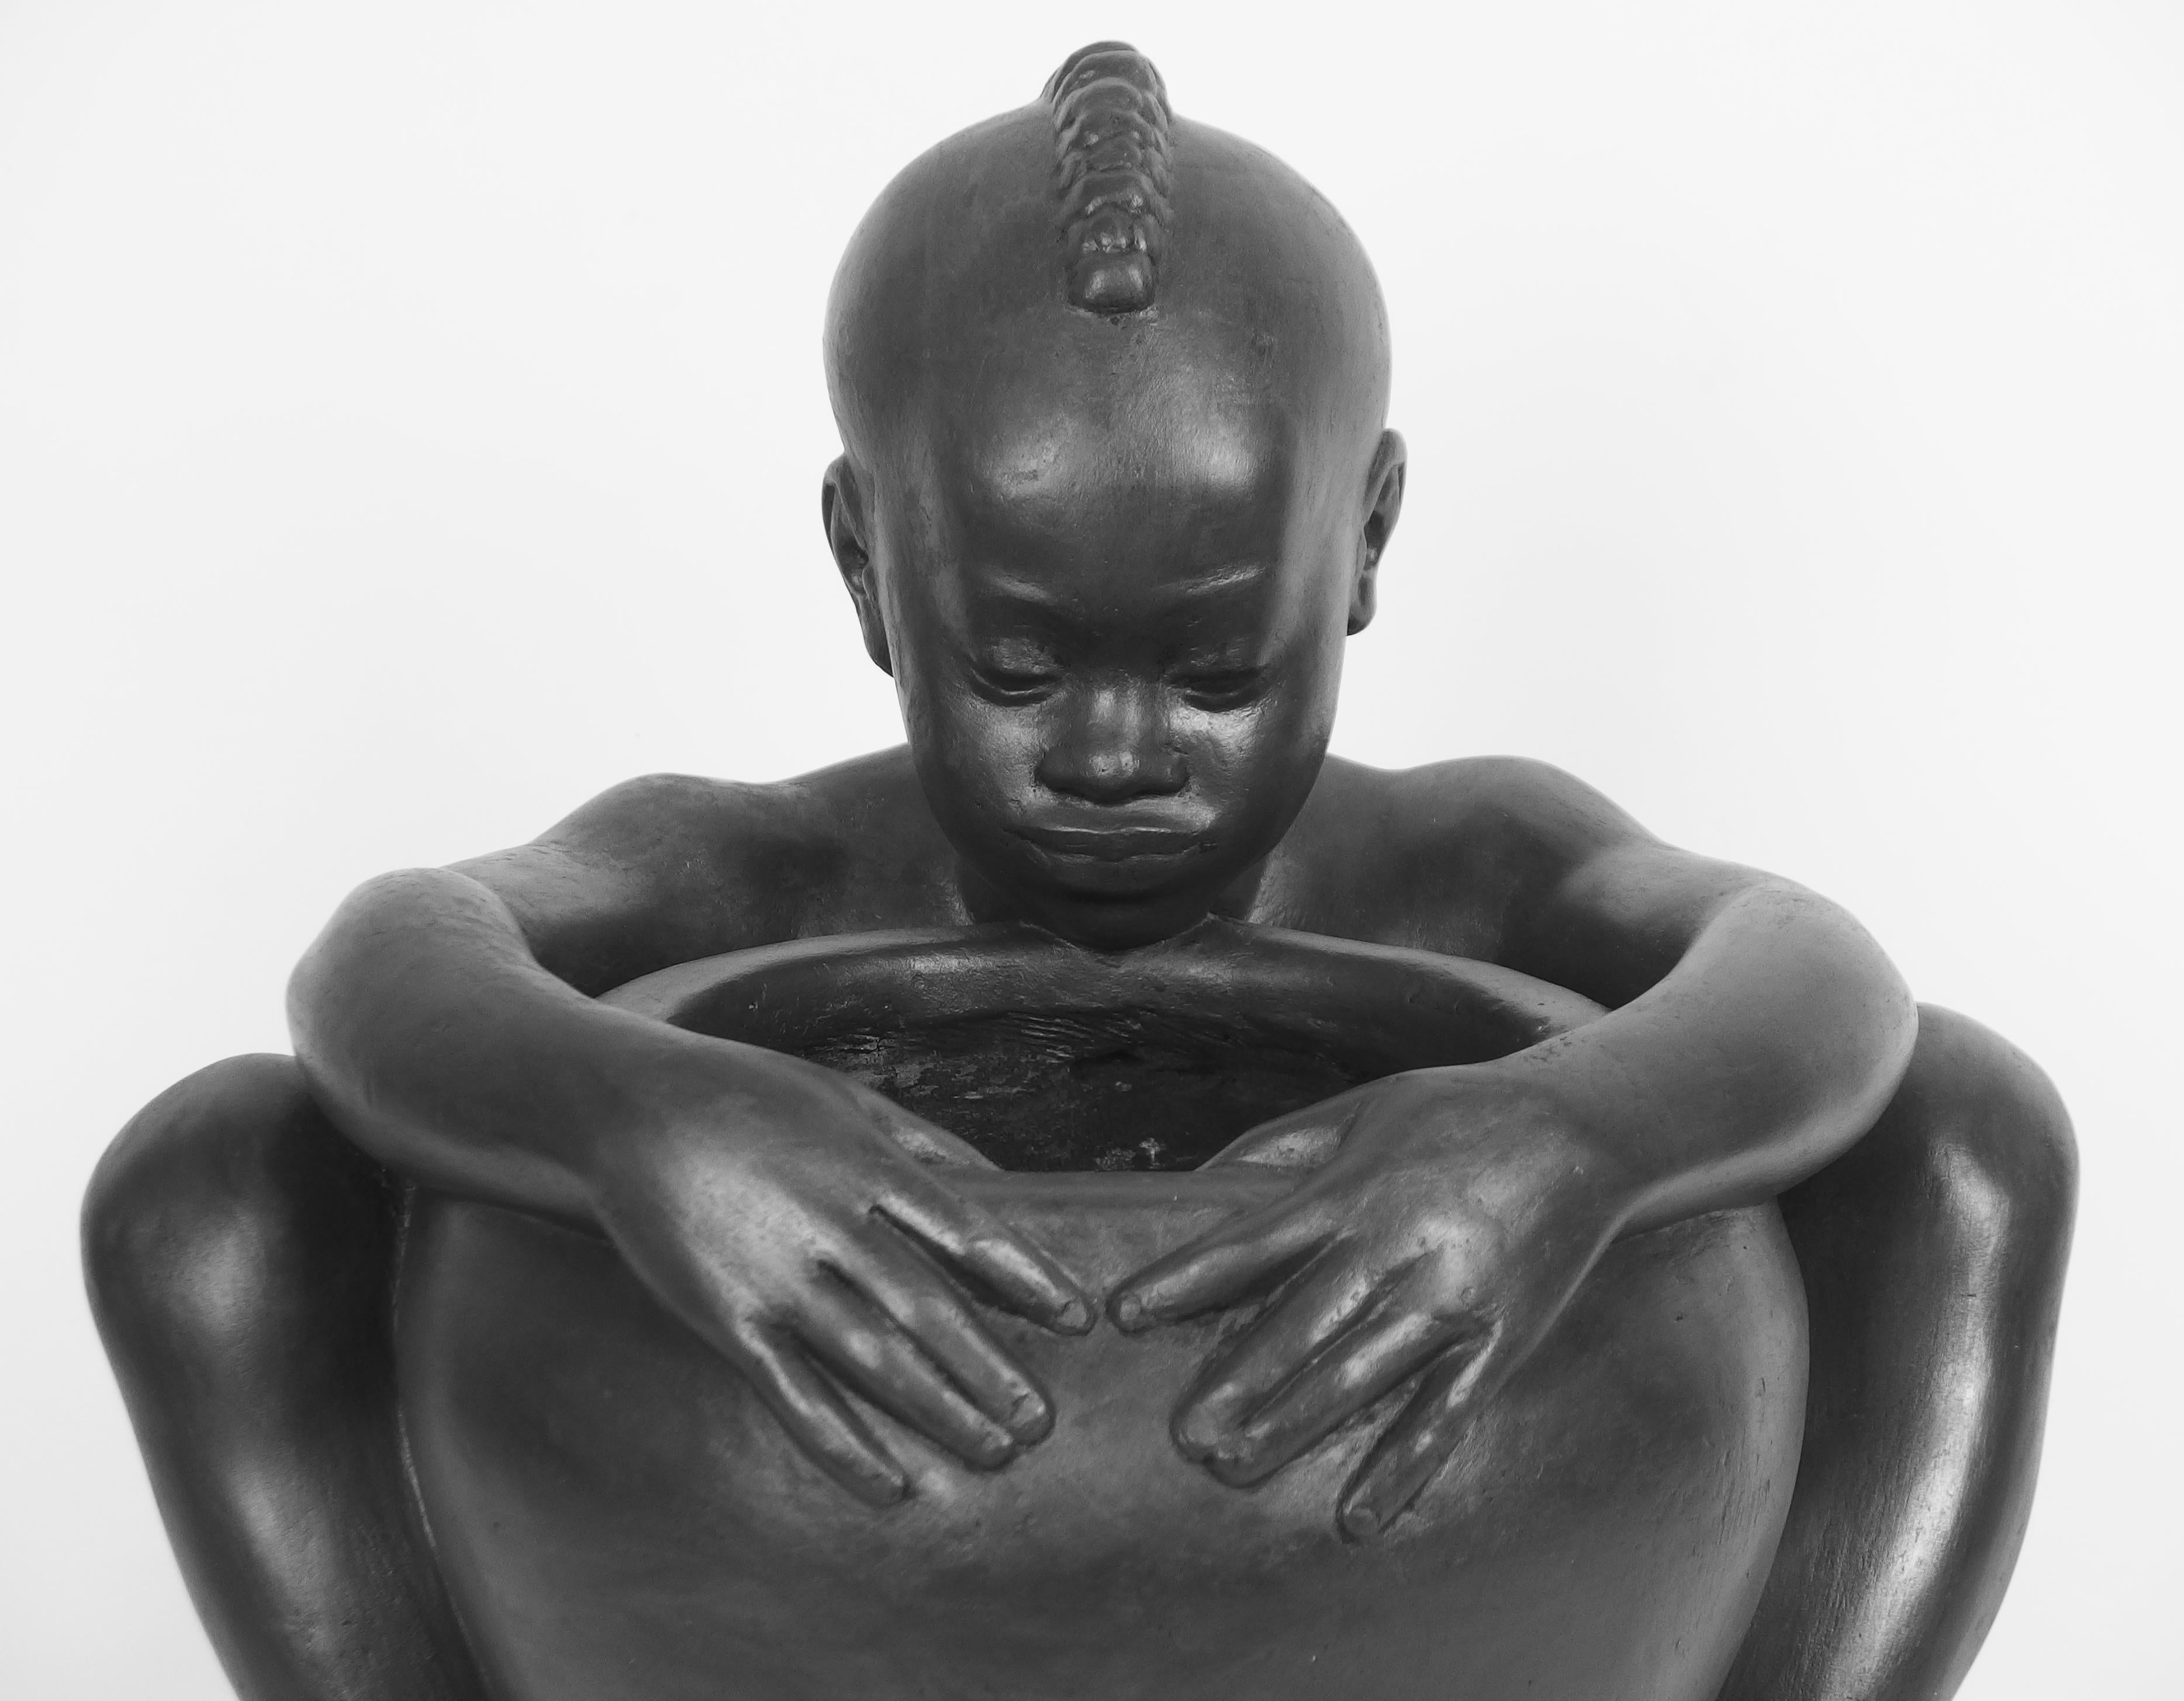 Molded Africanist sculpture by Riccardo Scarpa For Sale